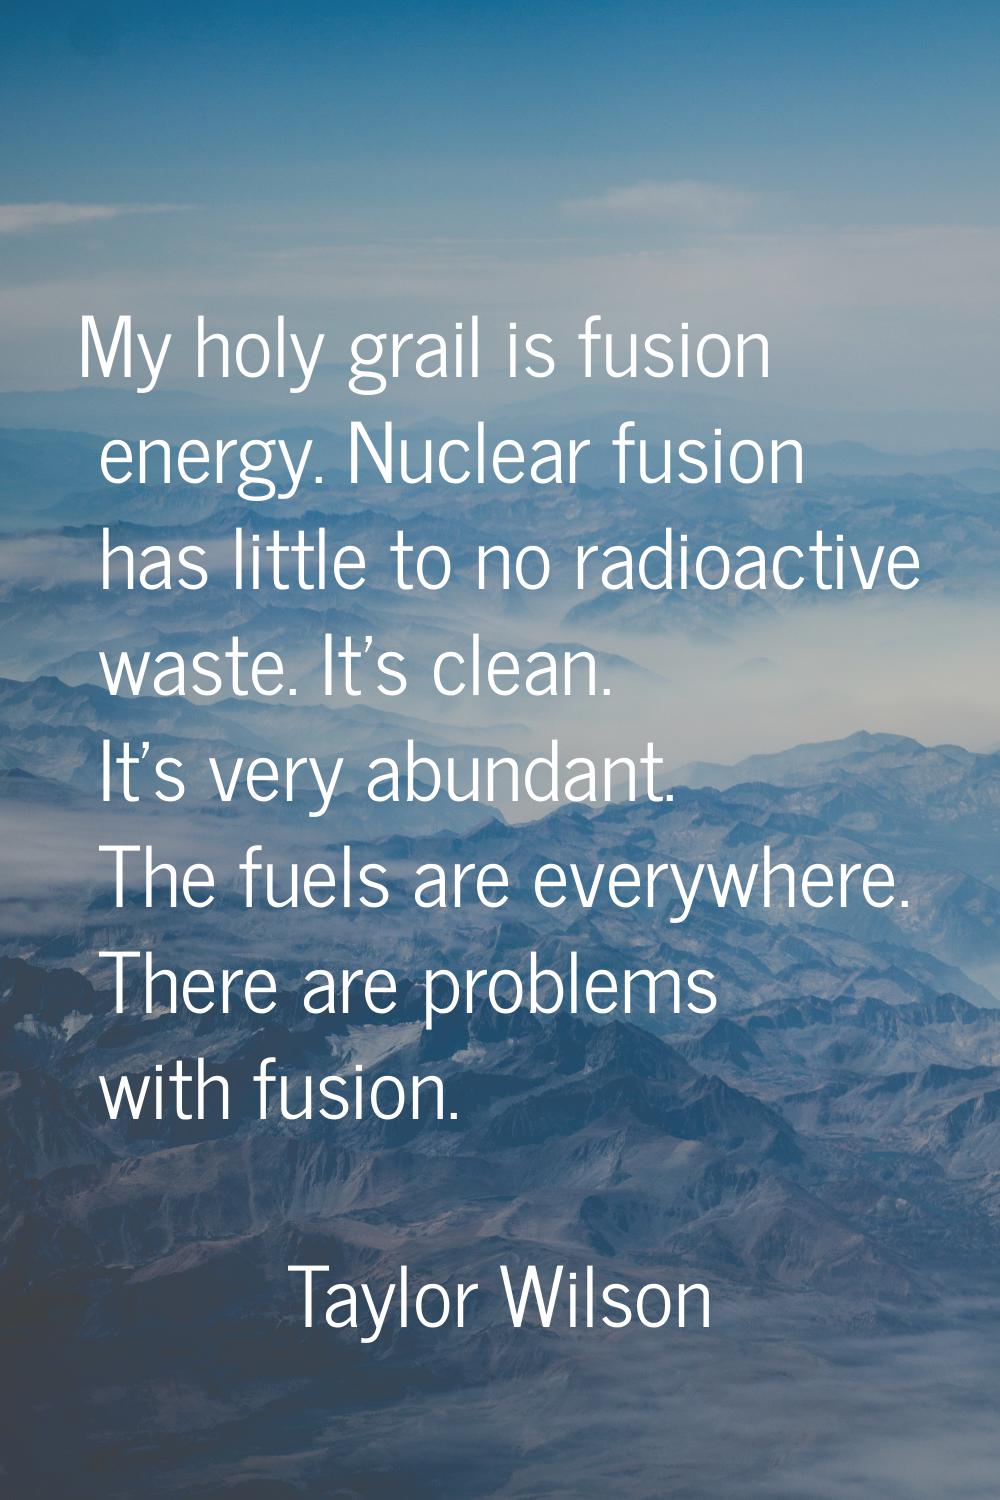 My holy grail is fusion energy. Nuclear fusion has little to no radioactive waste. It's clean. It's